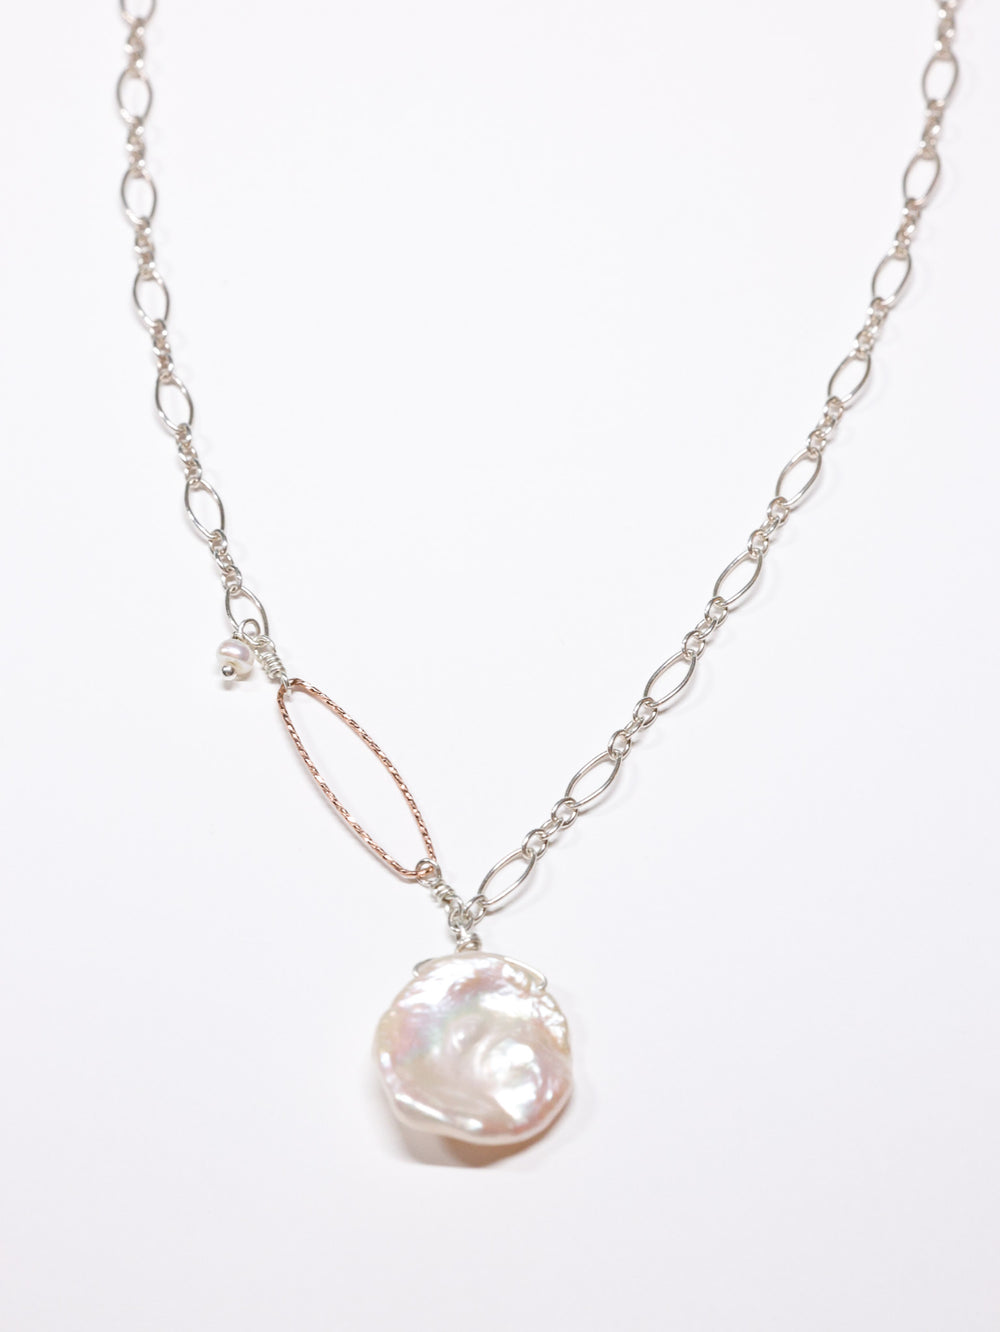 White Keshi freshwater pearl nh necklace -silver and rose gold